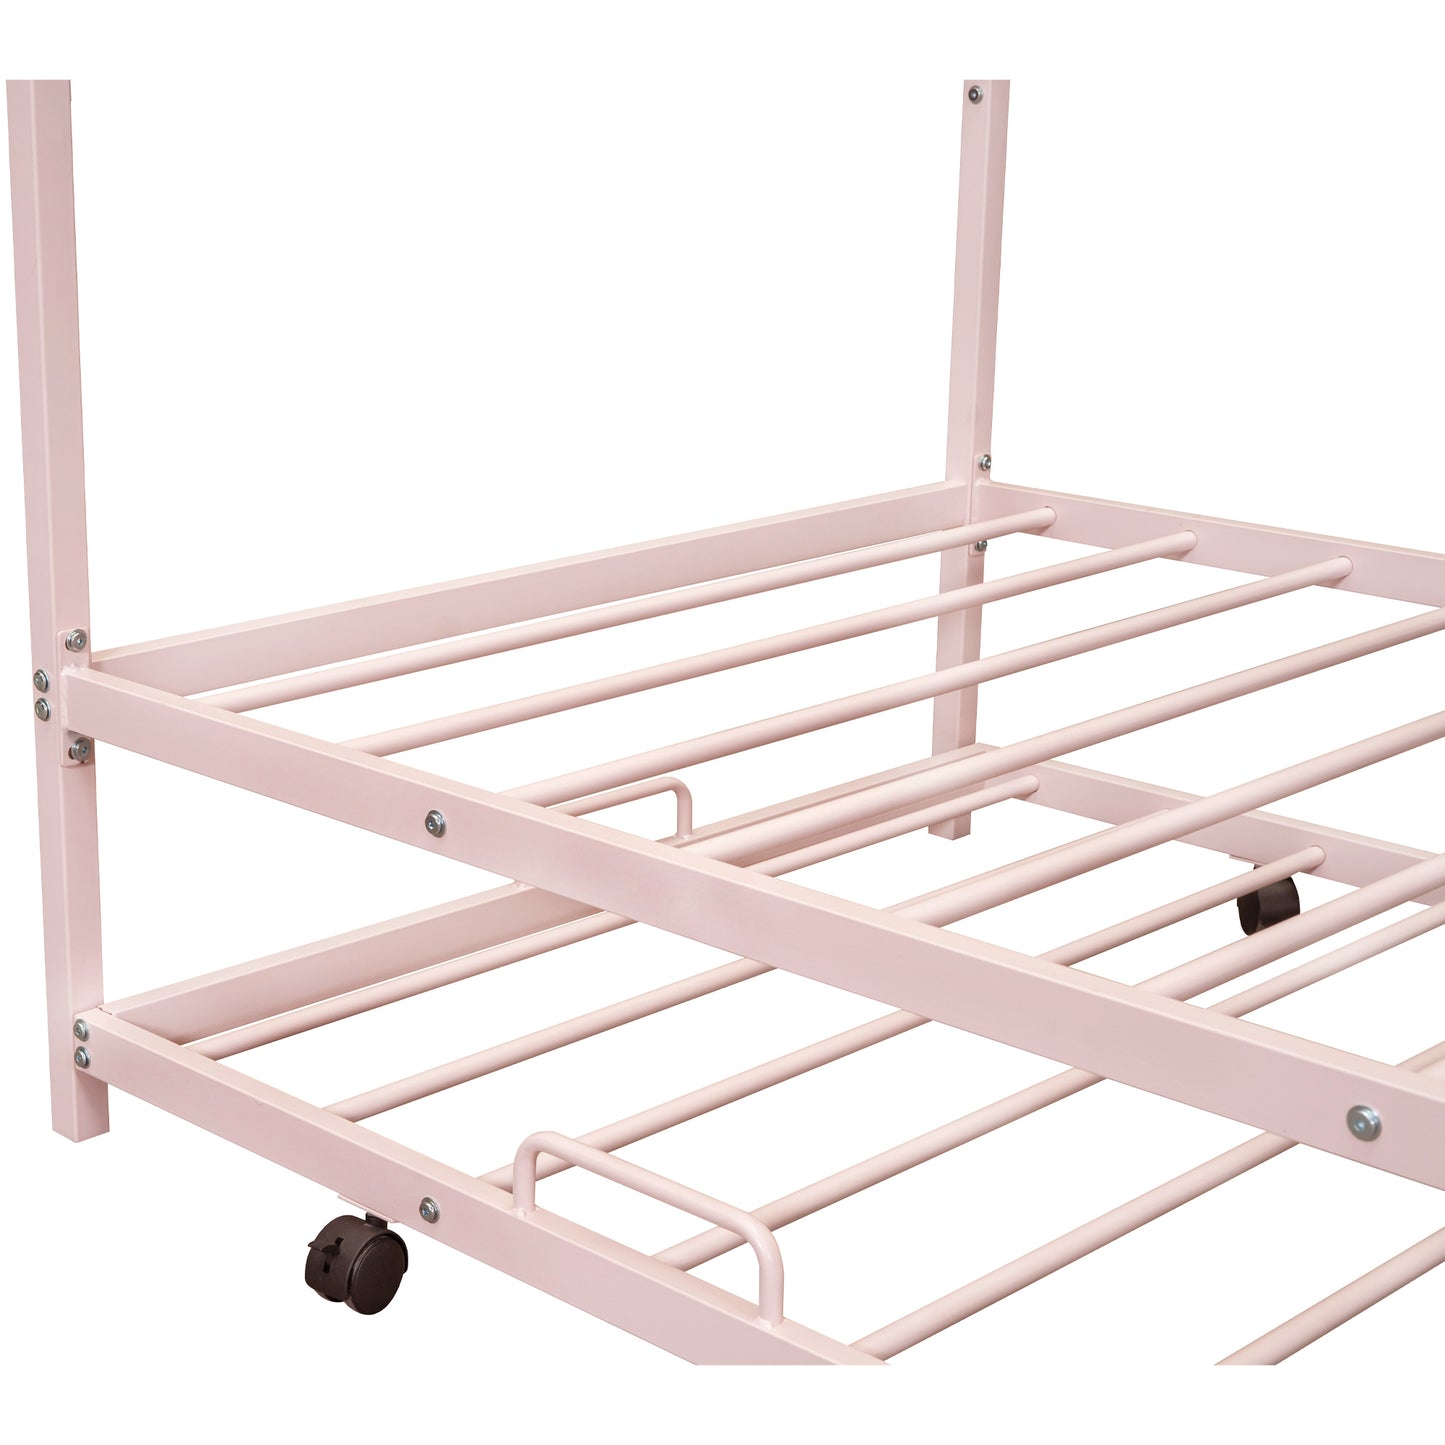 Twin Metal House Platform Bed With Trundle, Pink